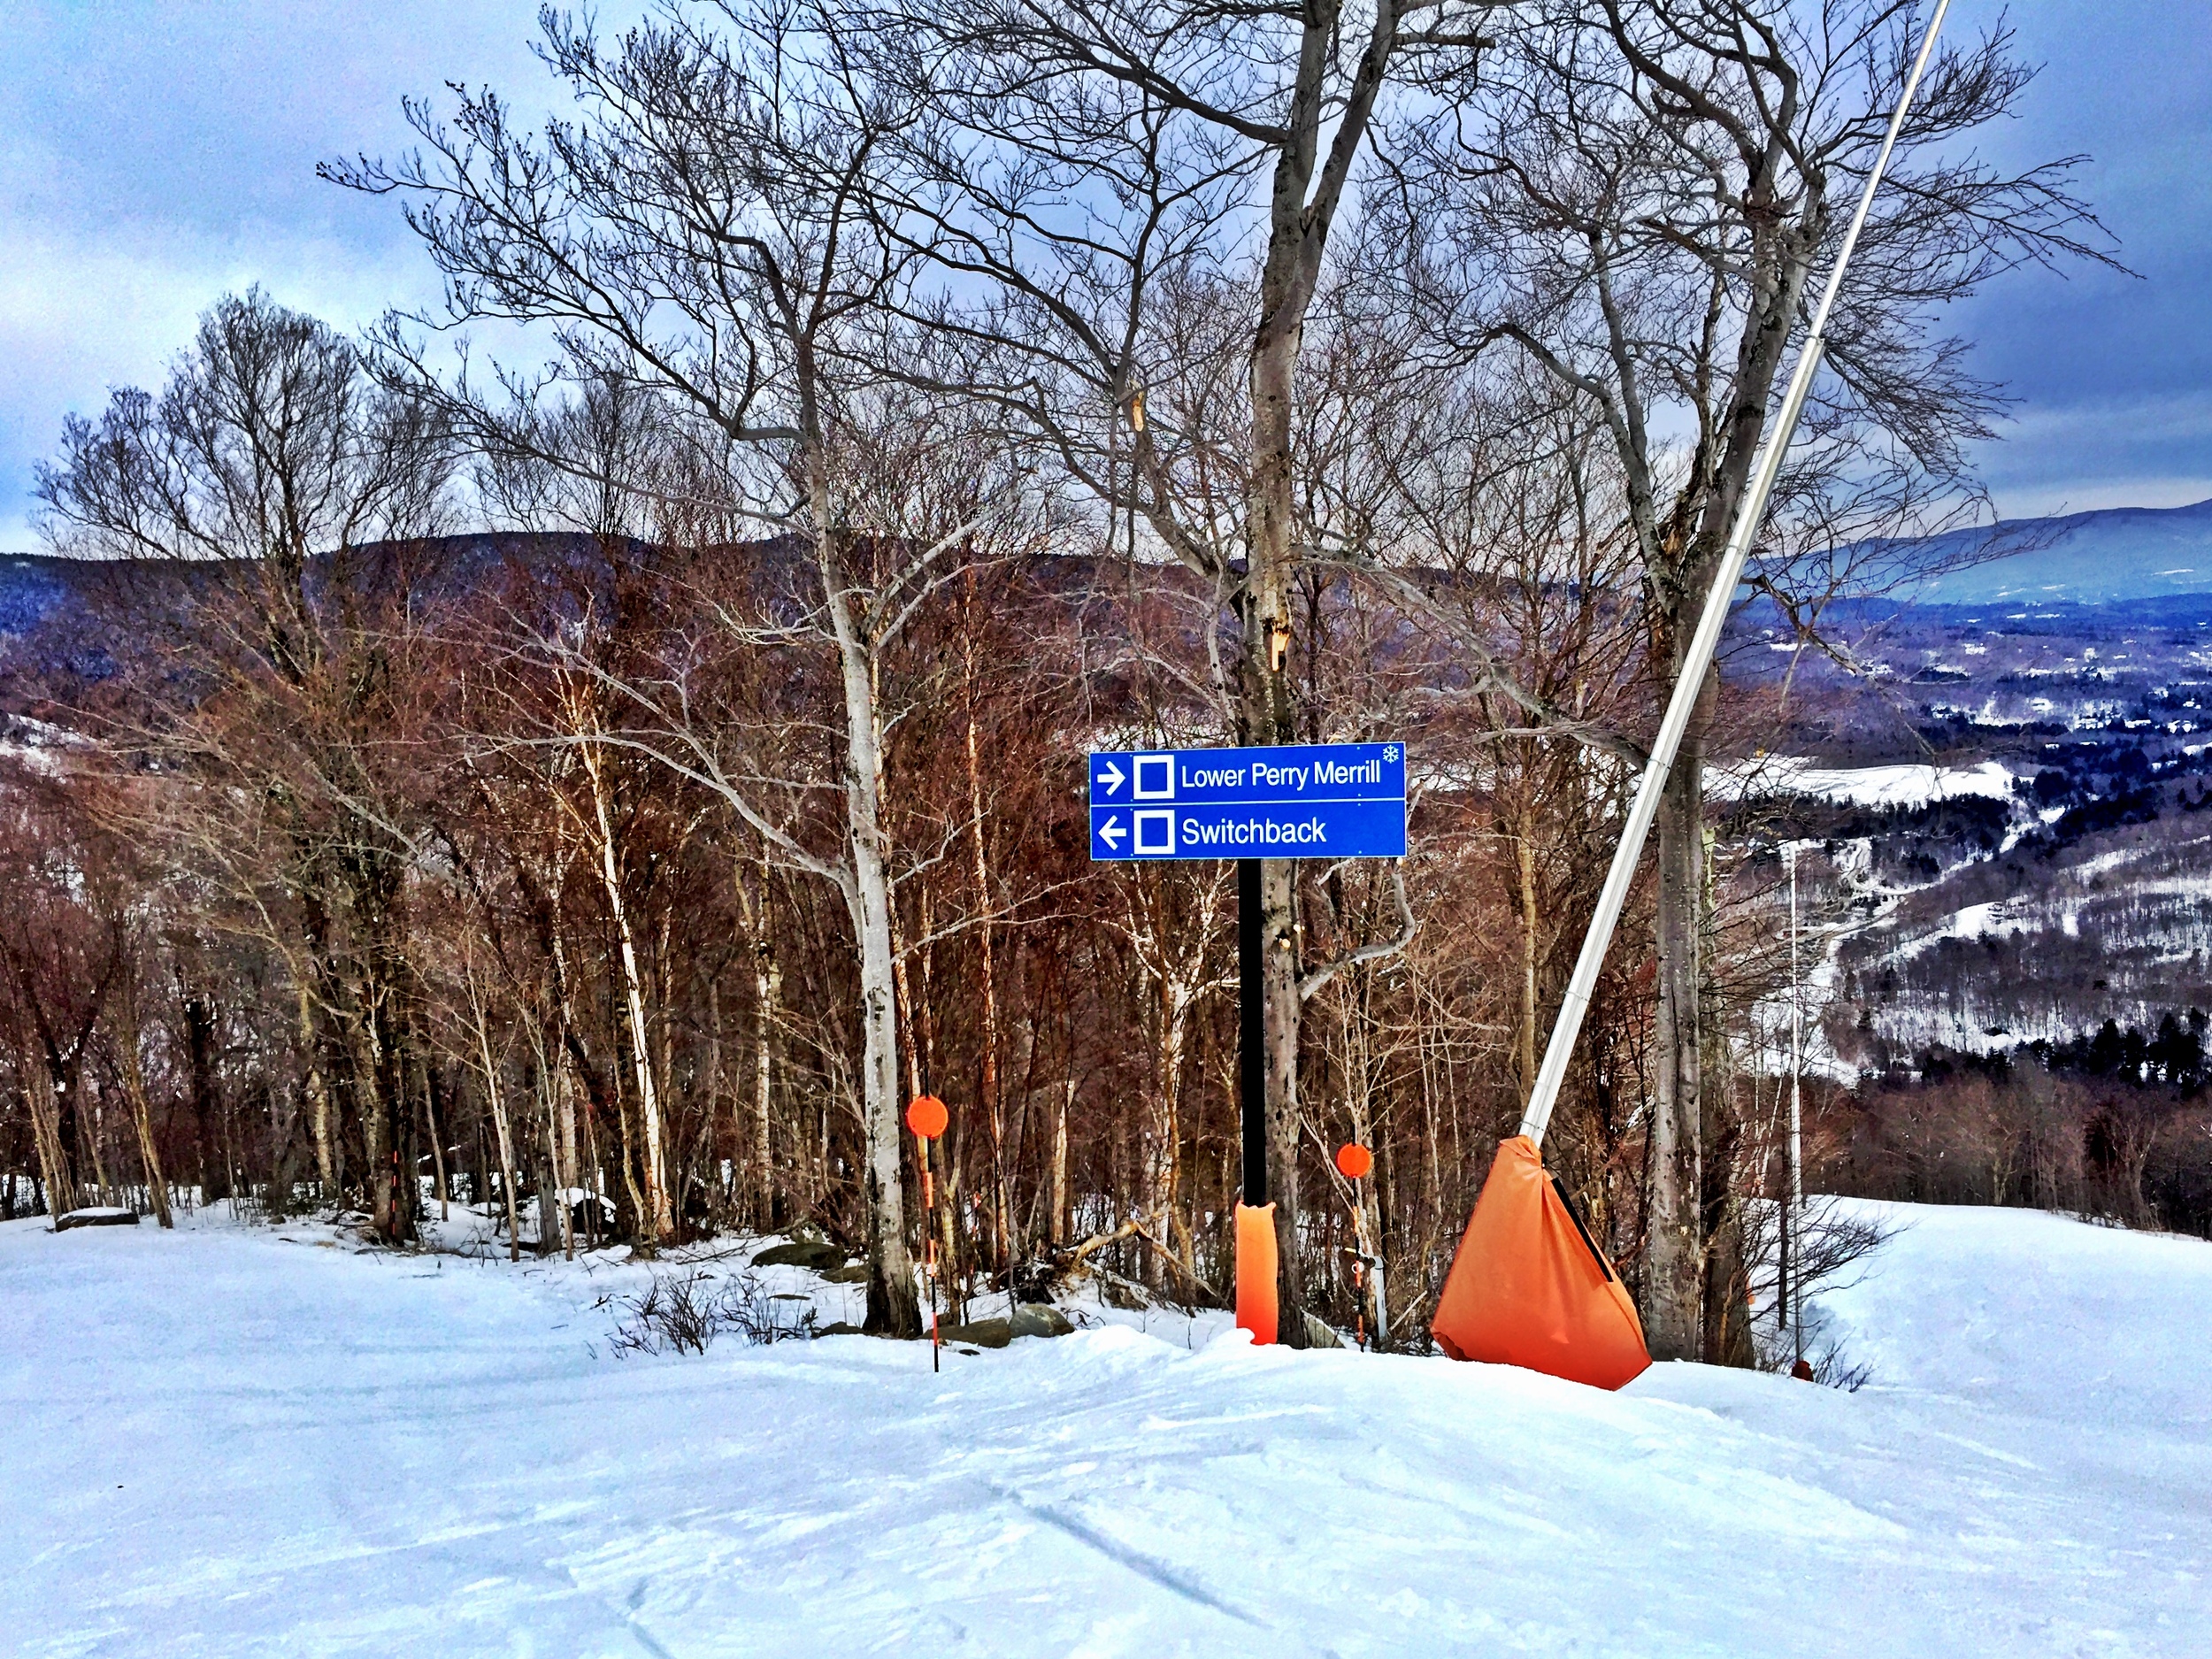 Grungy Slopes, Stowe Vermont, Stowe Mountain Lodge 29.jpg